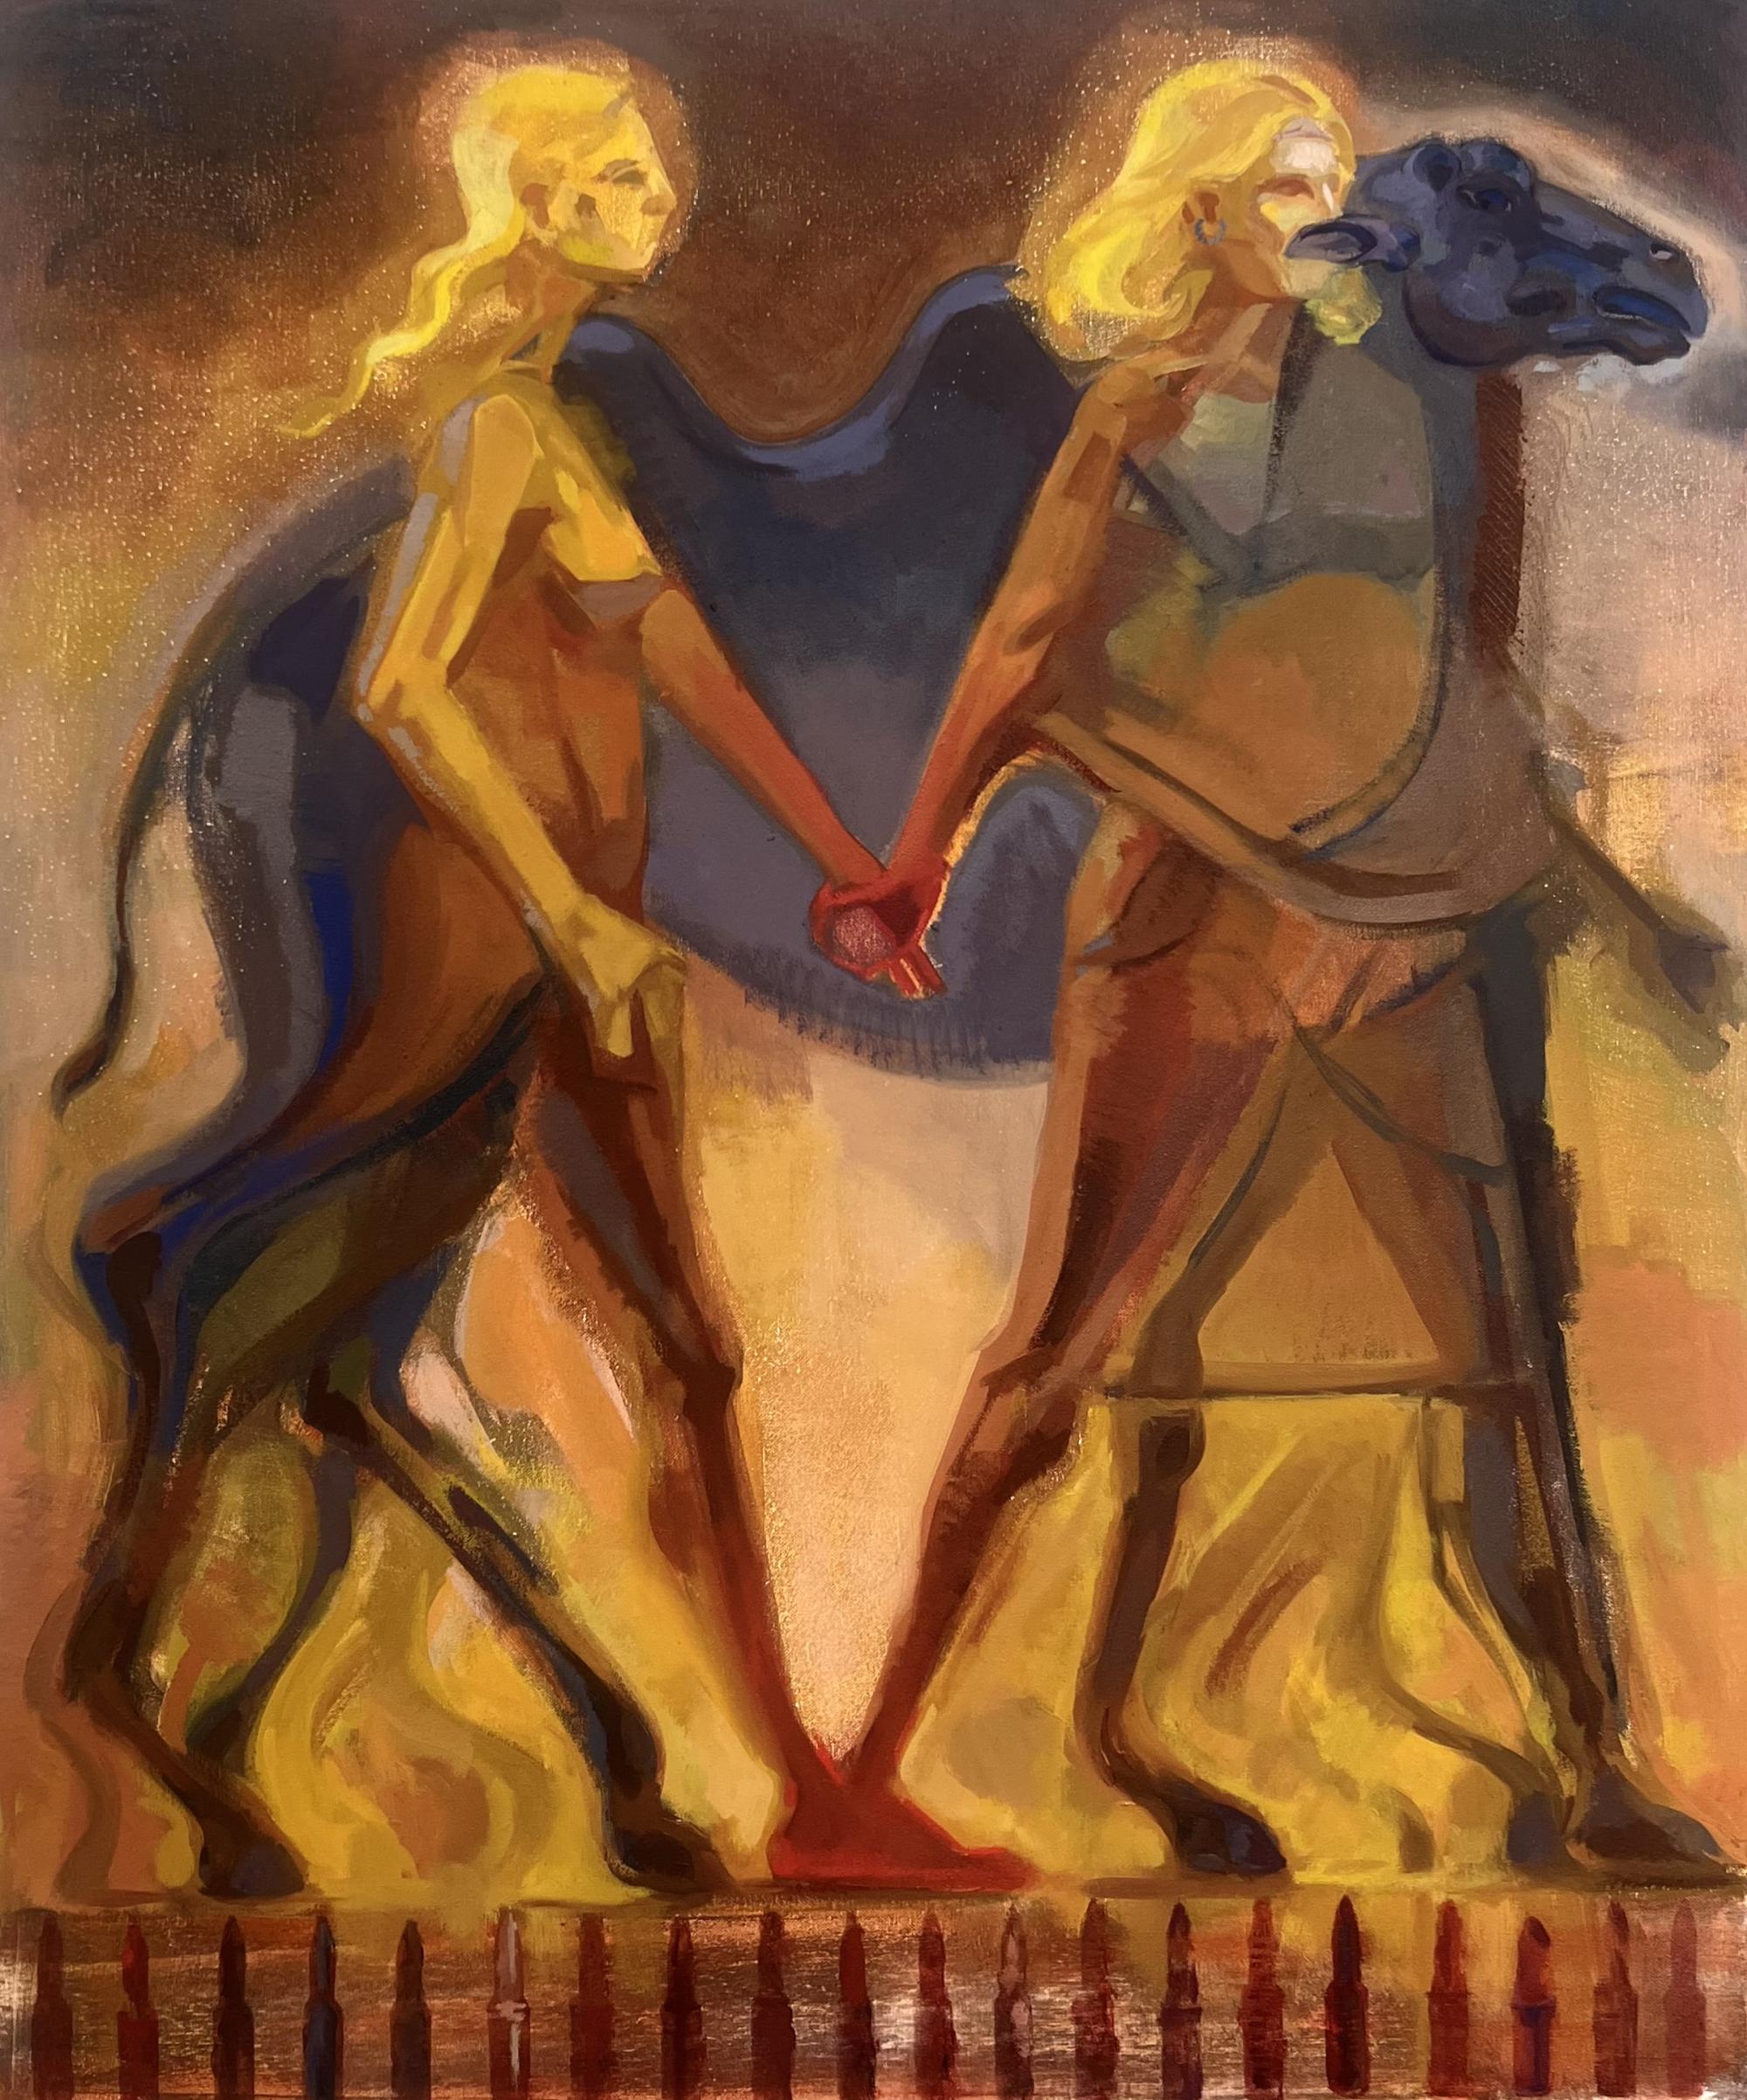 Two figures holding hands, with a camel in the background